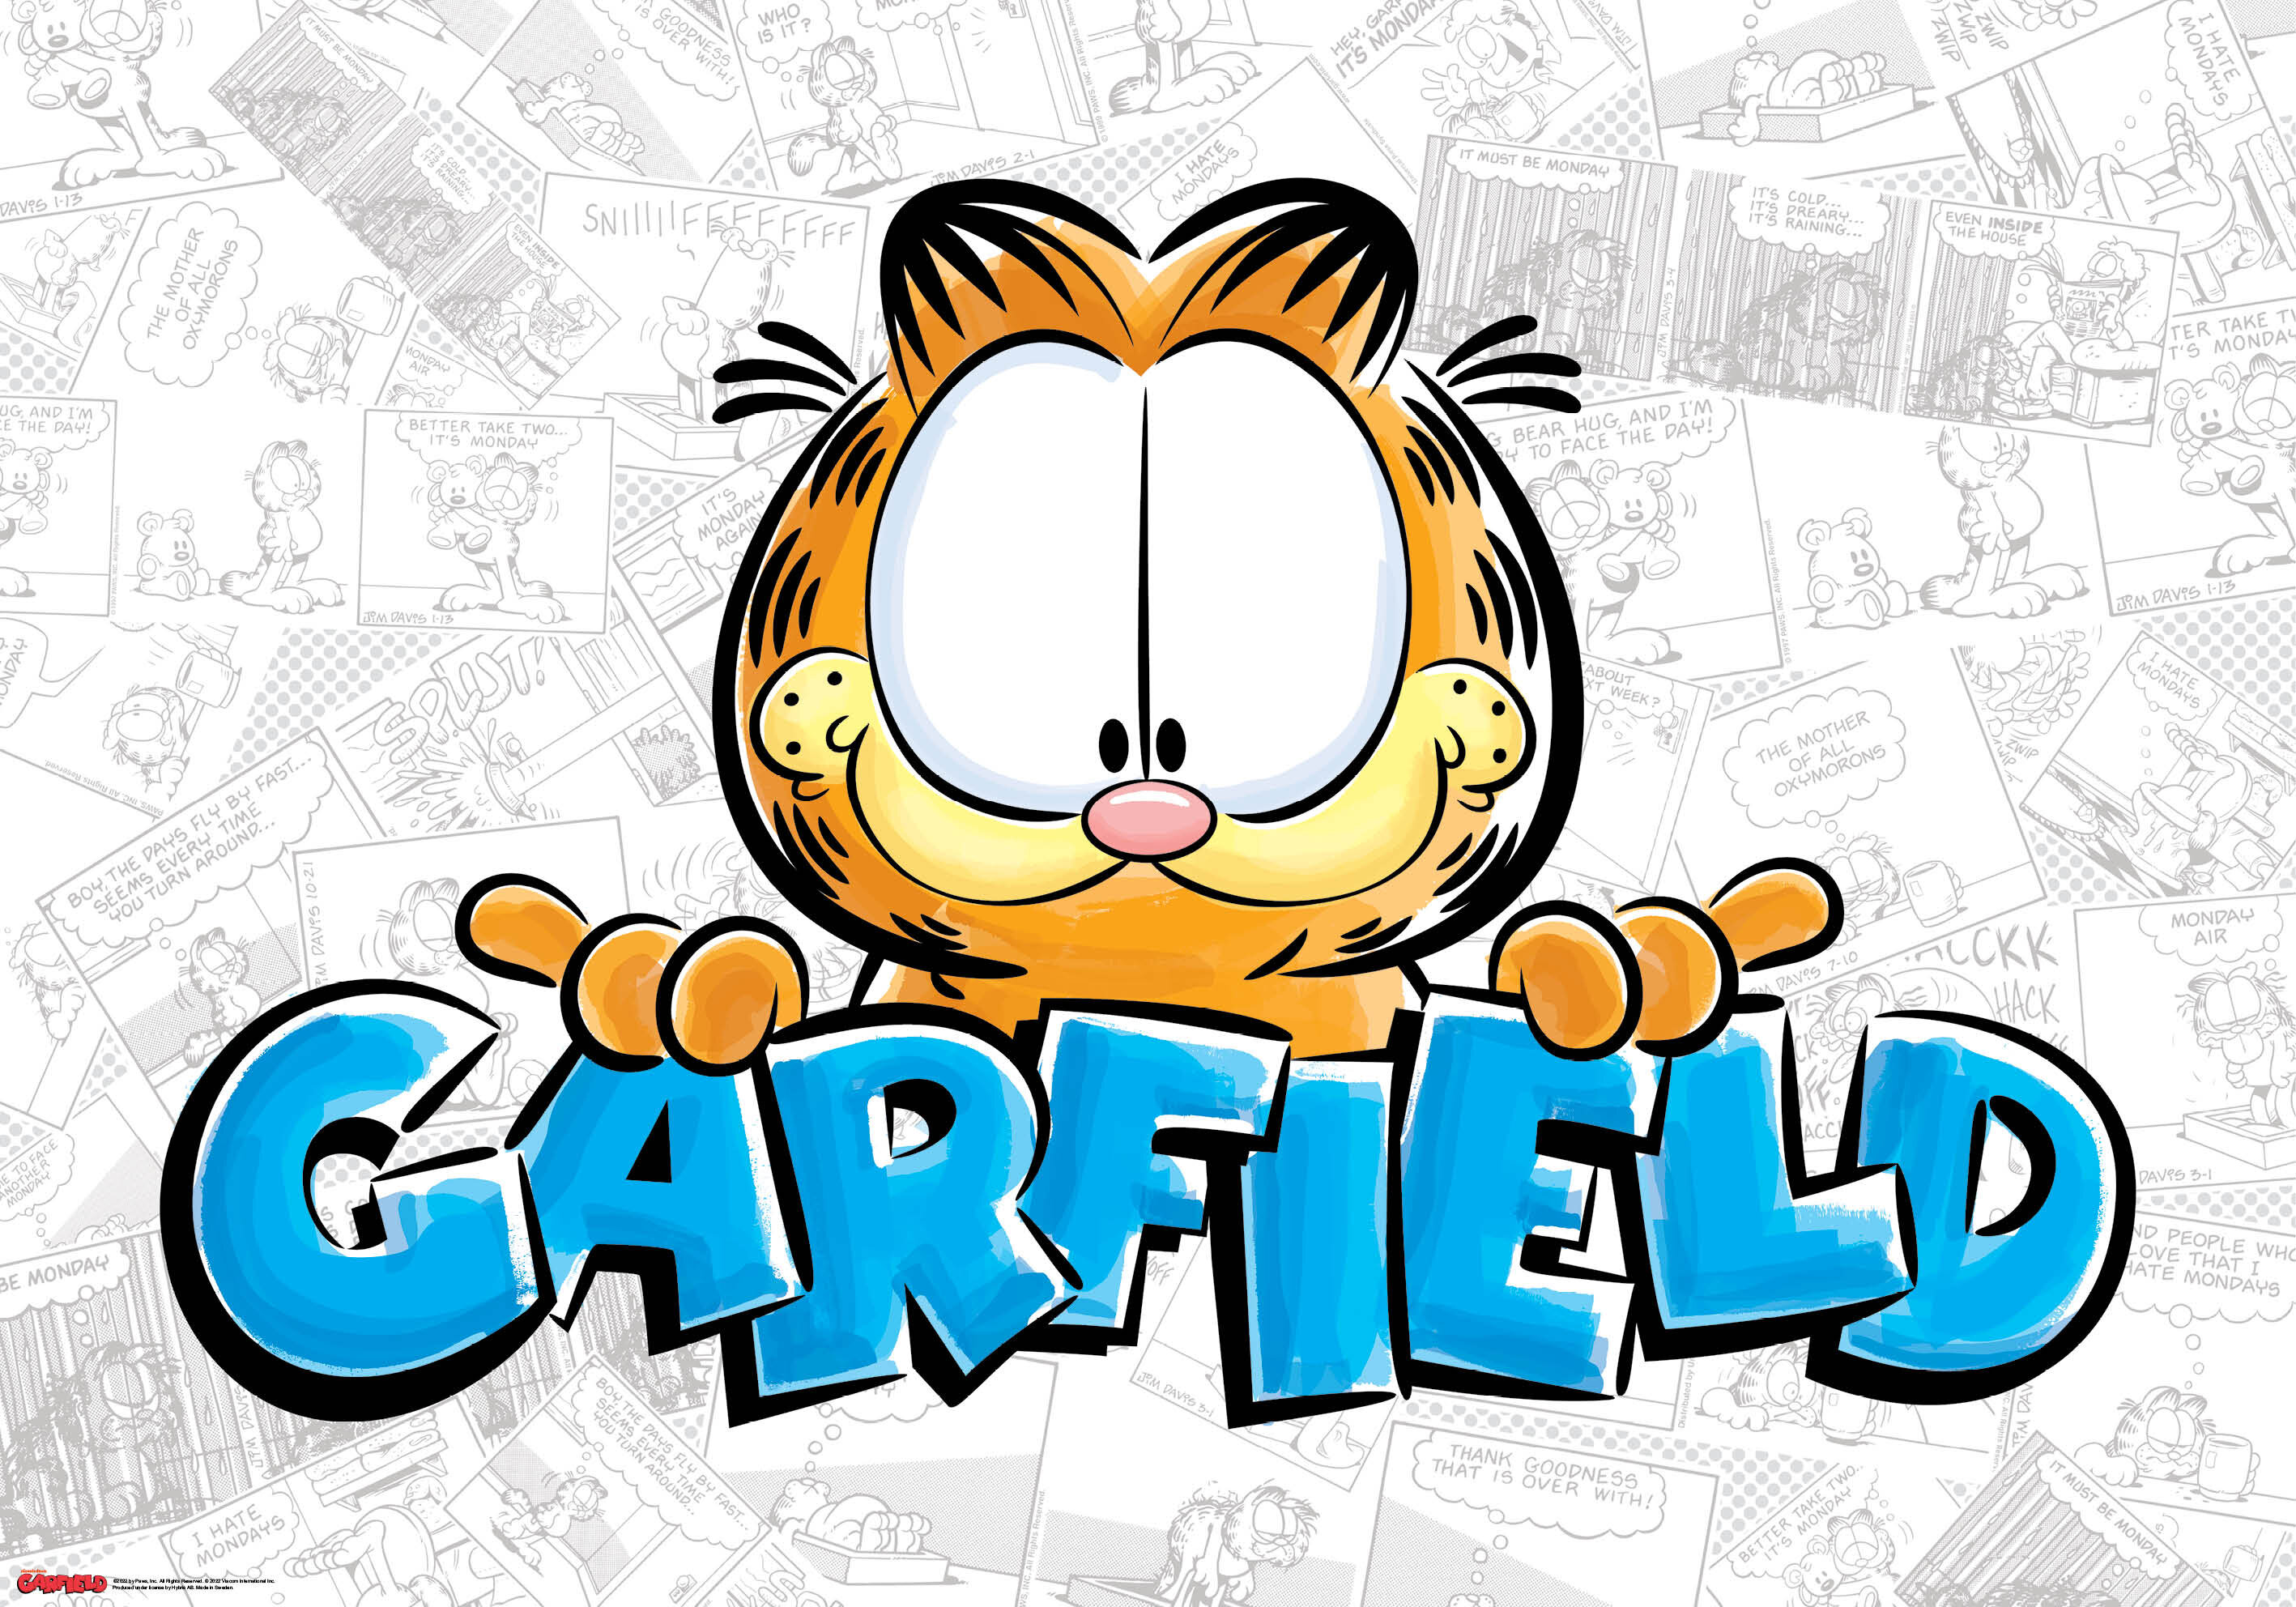 Garfield Scetched Poster